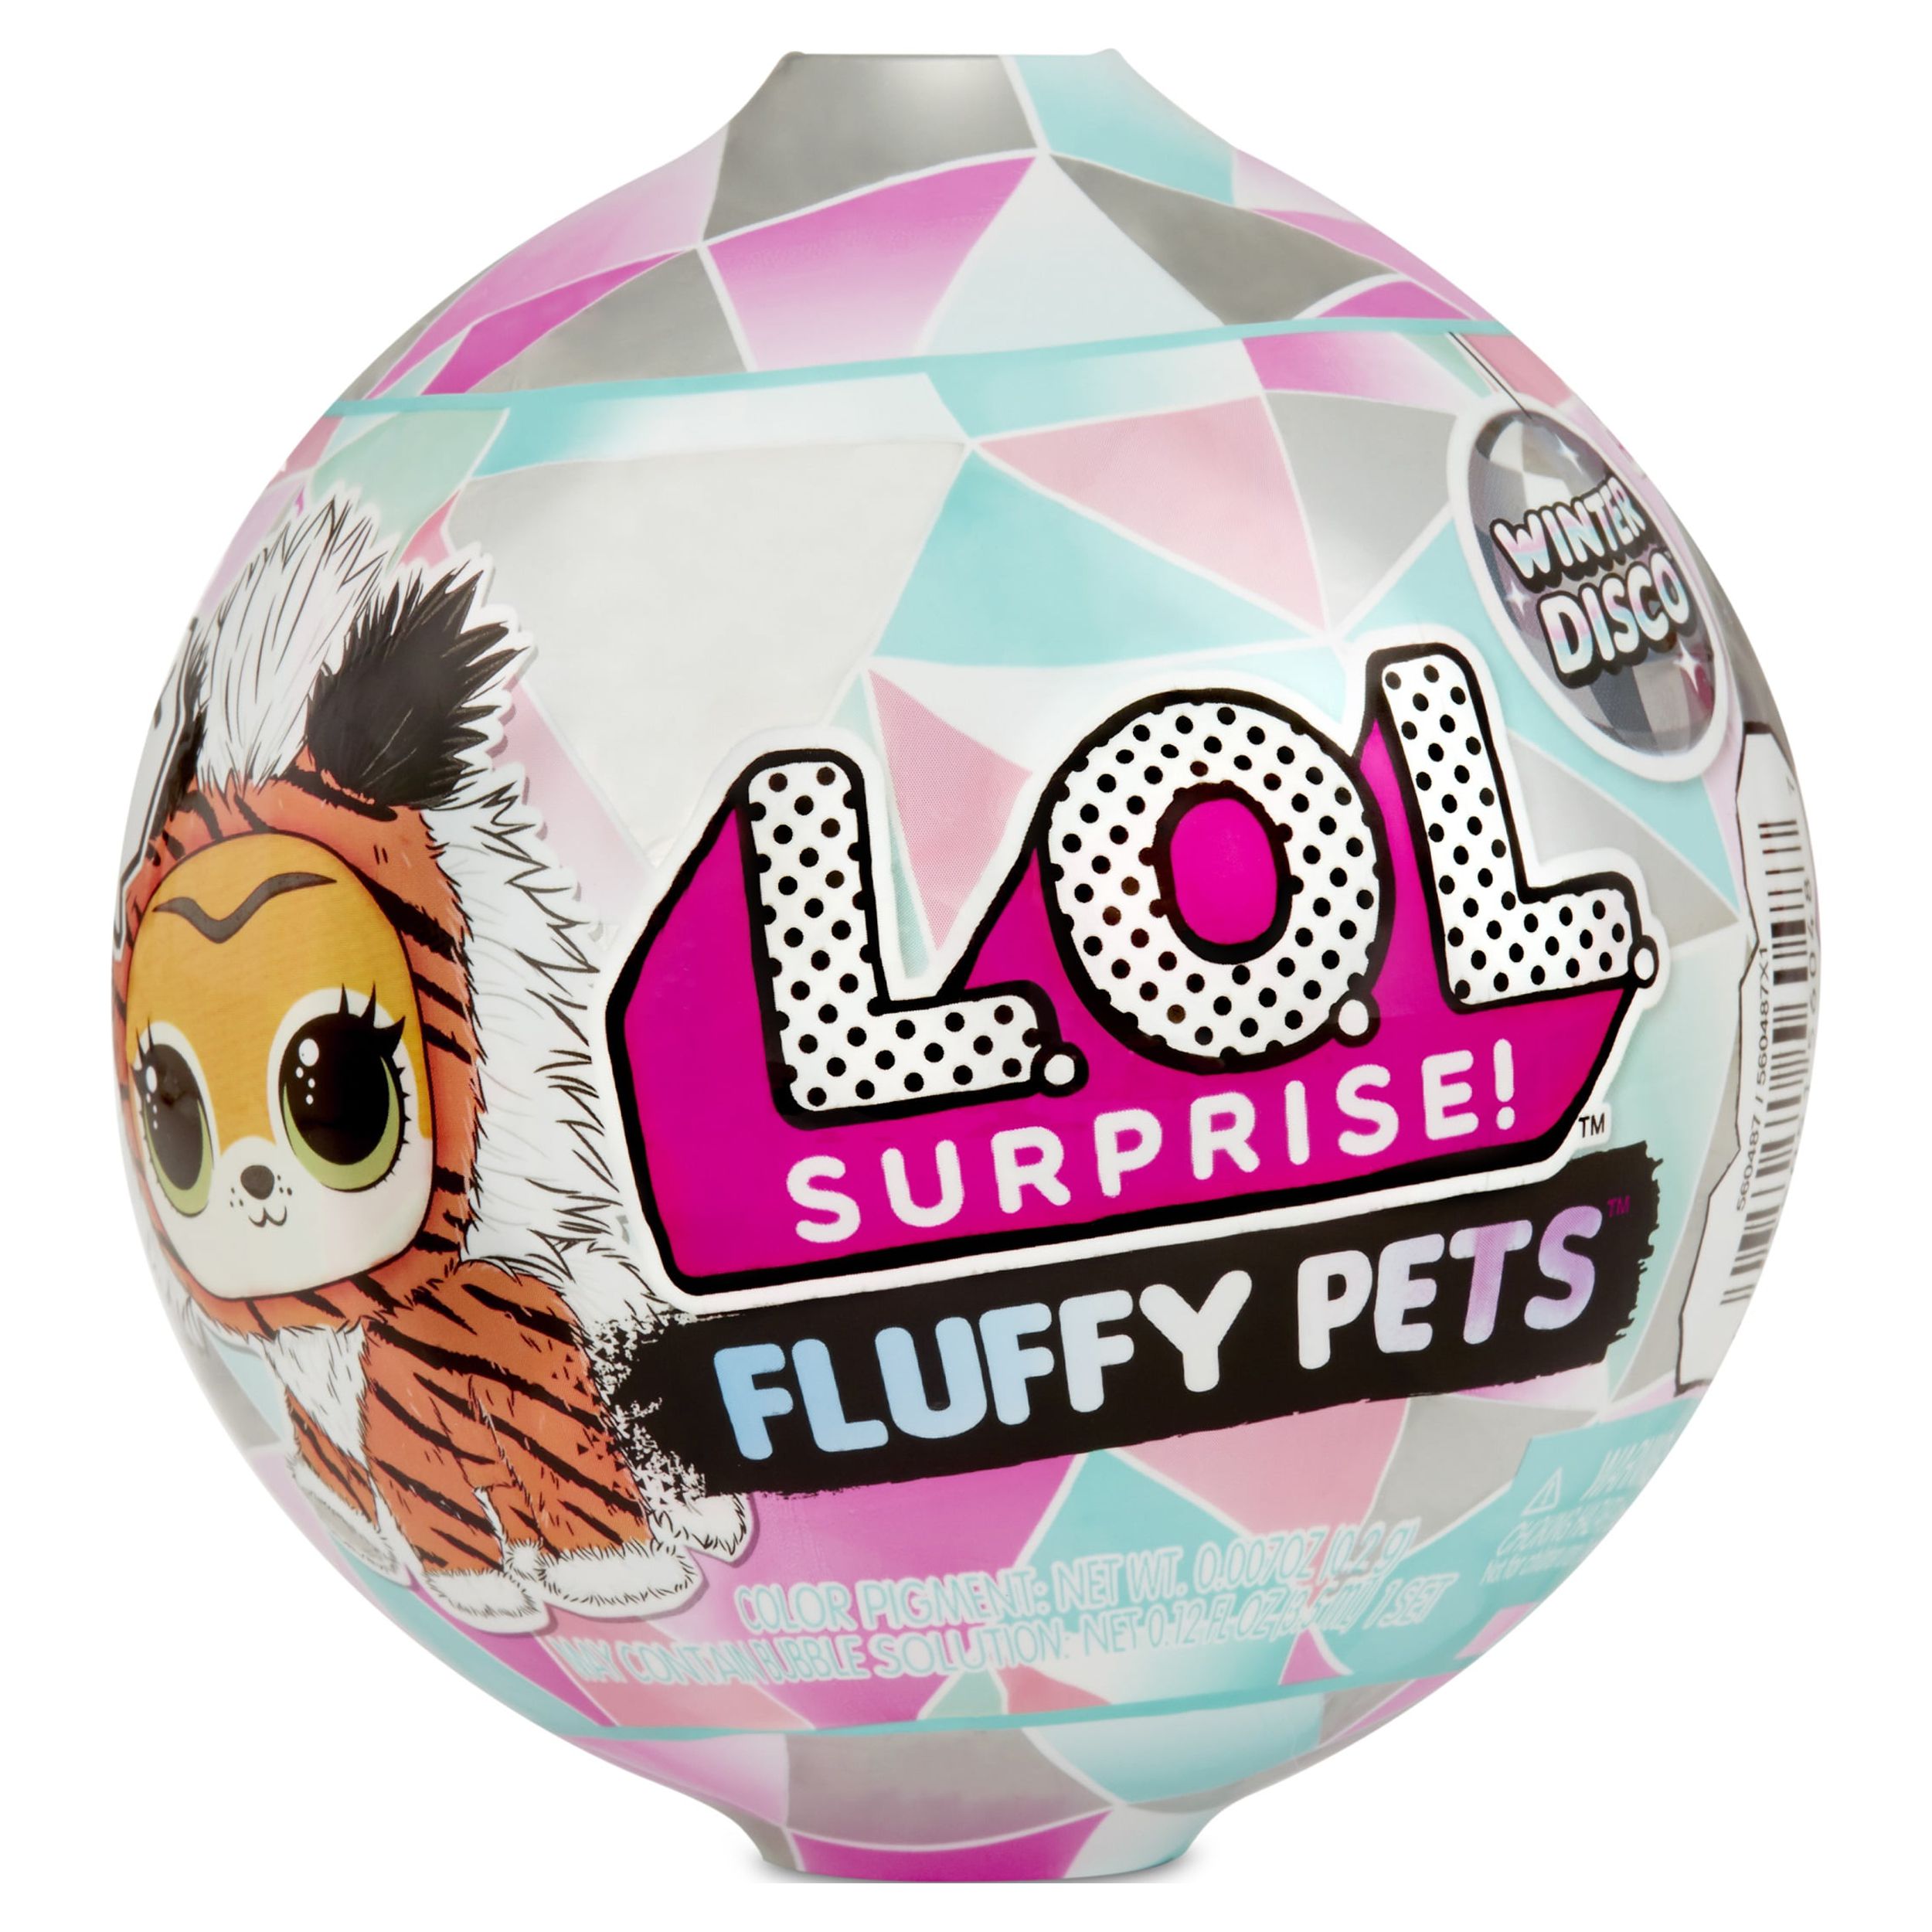 LOL Surprise Fluffy Pets Winter Disco Series Dolls With Removable Fur and 9 Surprises including Accessories - Doll Toys for Girls and Boys Ages 4 5 6+ - image 1 of 7